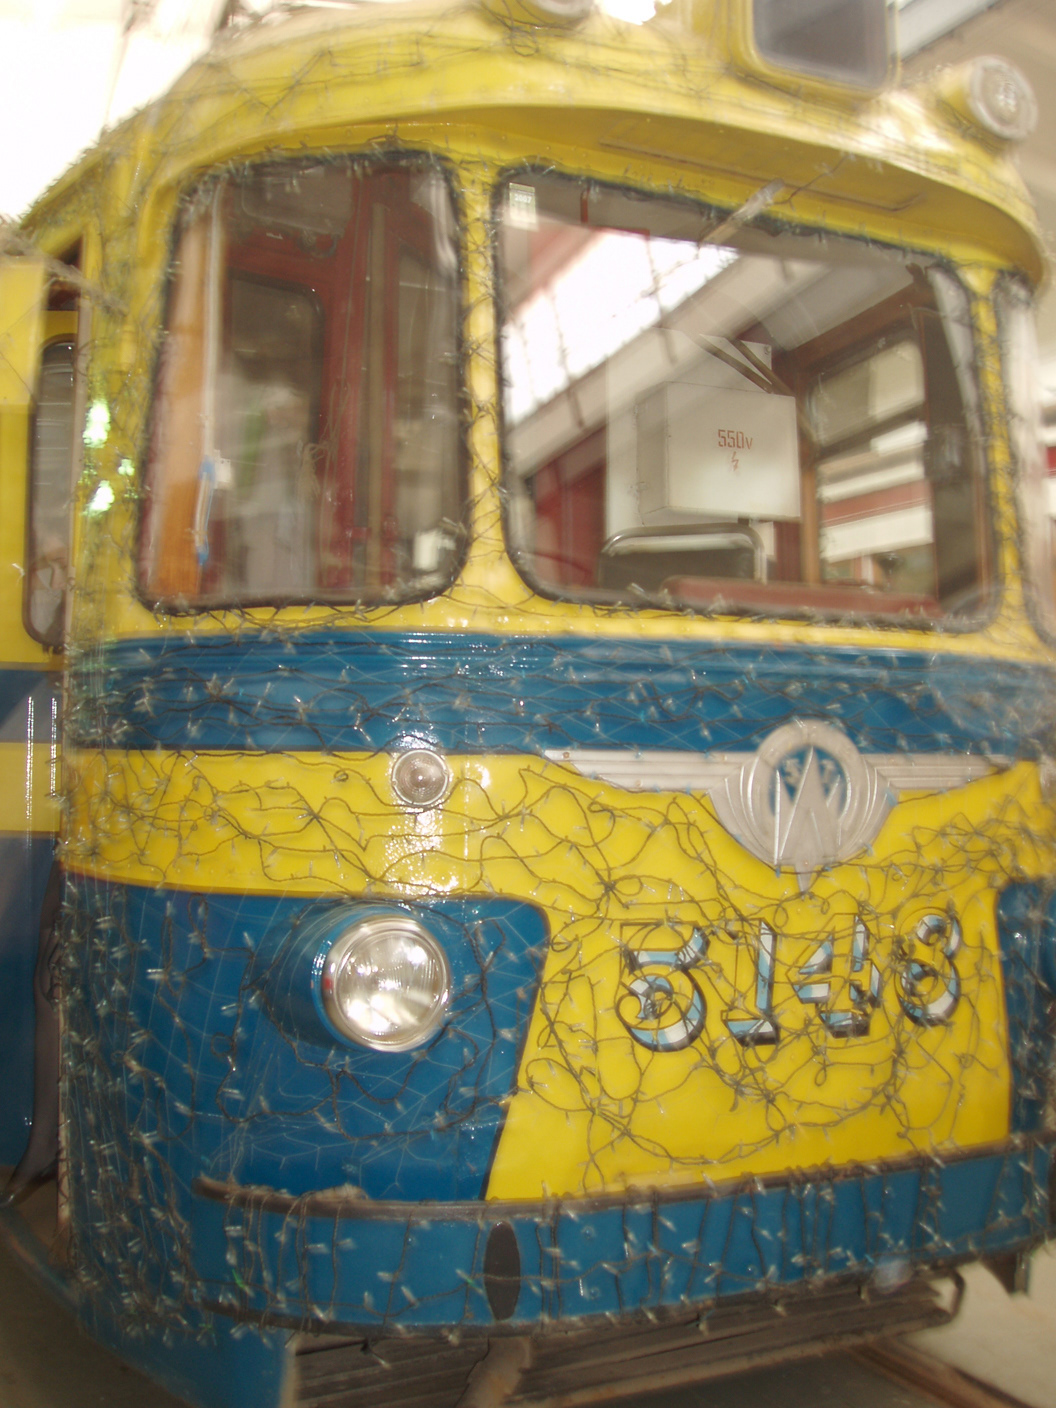 museum city Transport electric history endangered Russia st.petersburg